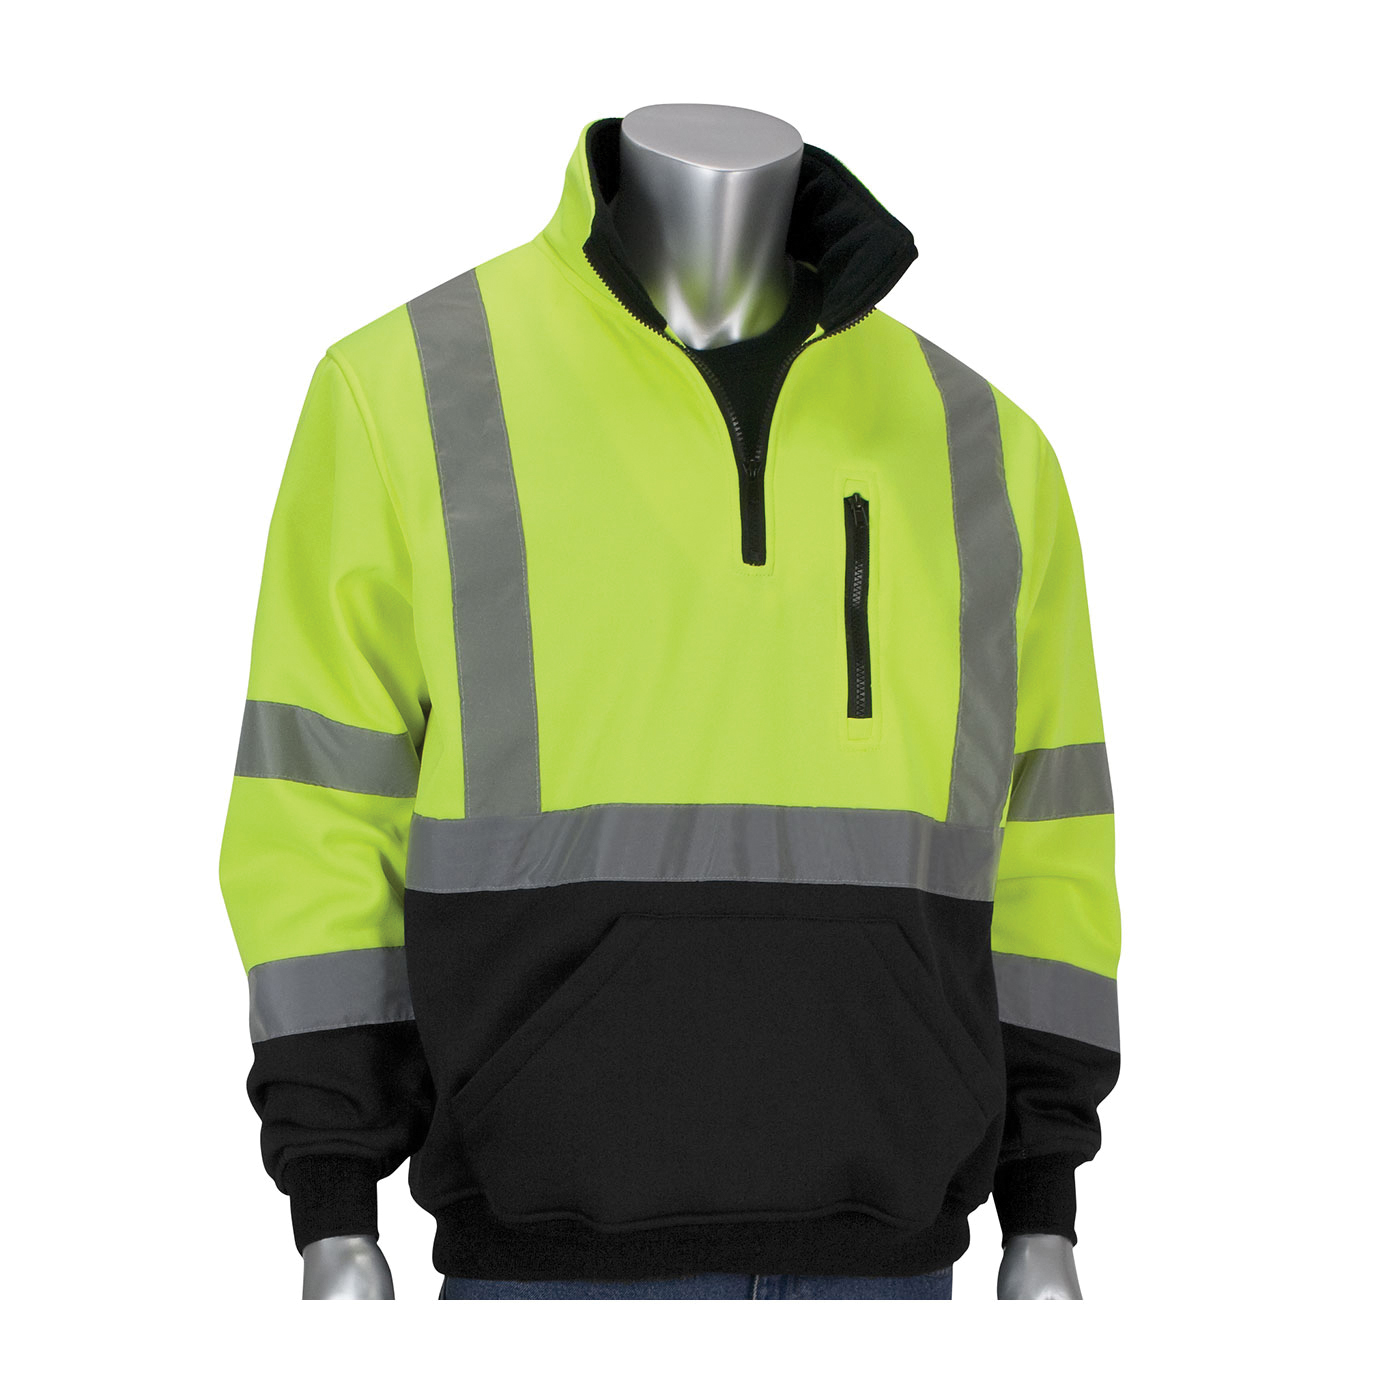 PIP® 323-1330B-LY/M Sweatshirt With Black Bottom, Unisex, M, Lime Yellow, 29.1 in L, Polyester Fleece